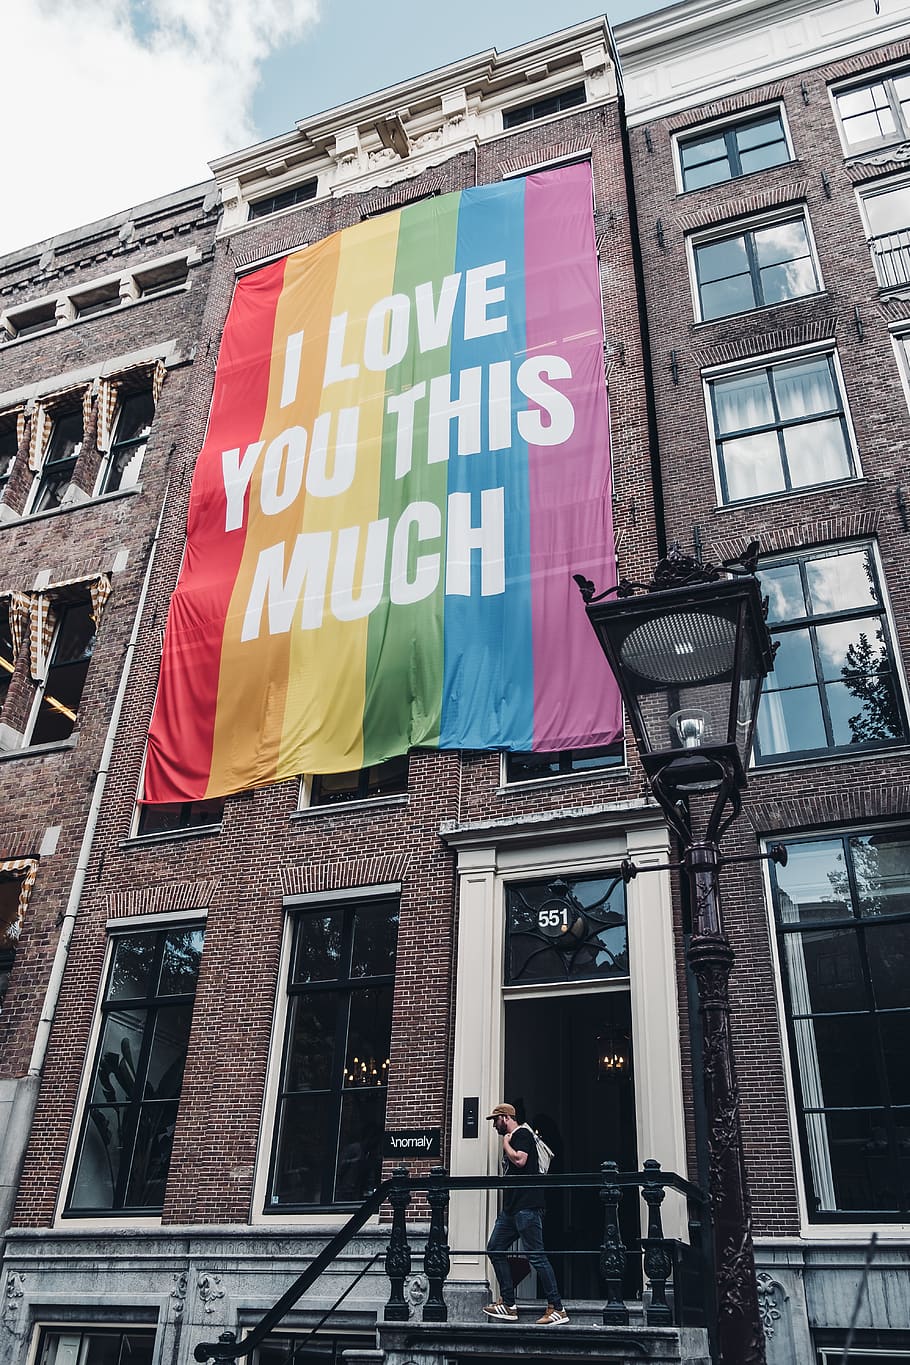 I love you this mush poster hanged on brown painted building, HD wallpaper